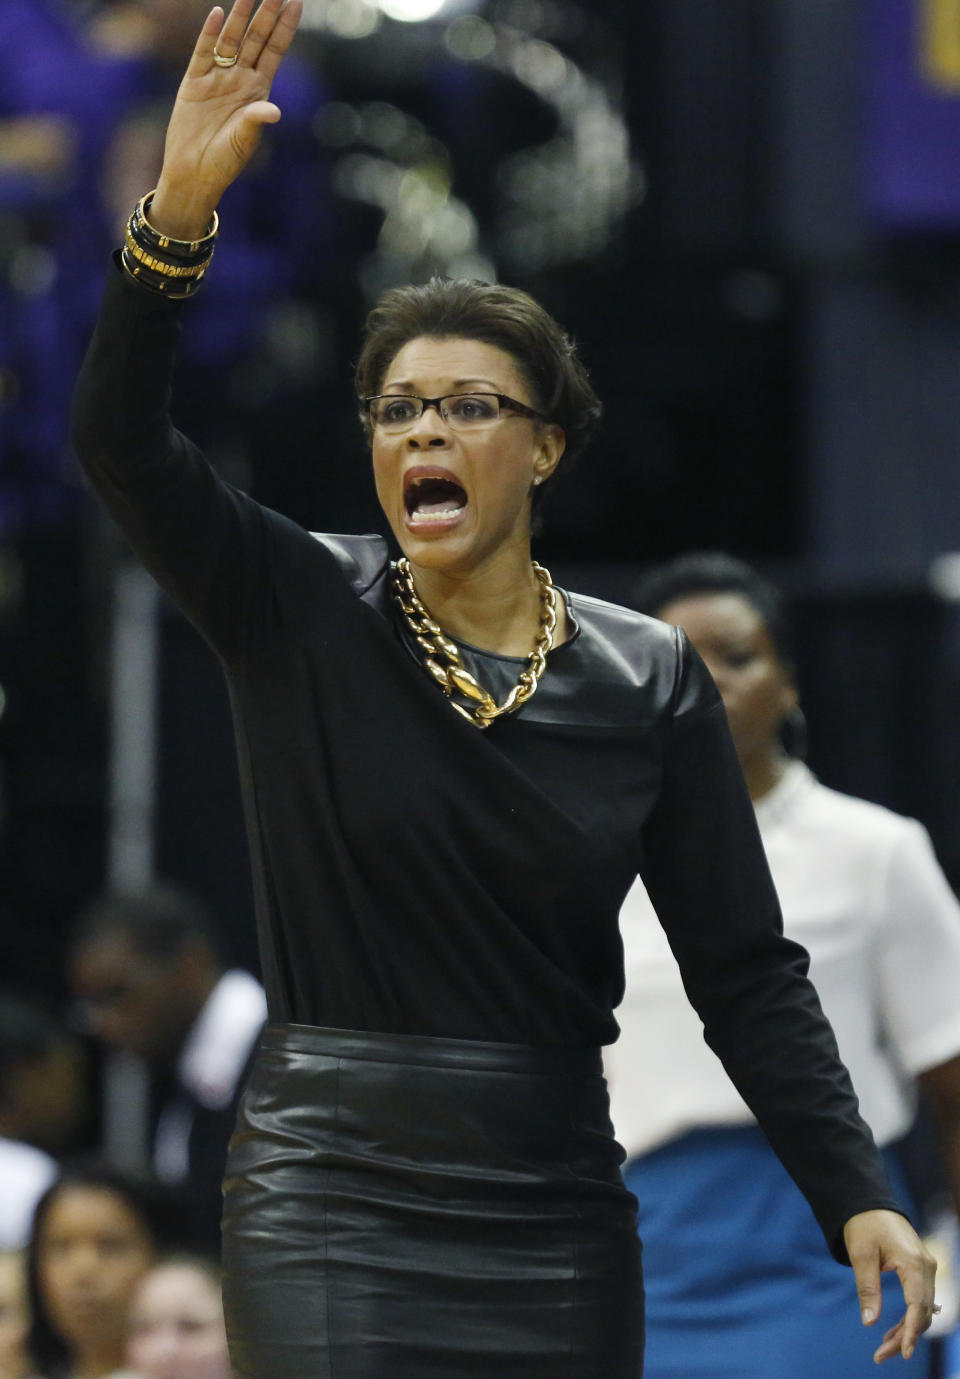 LSU basketball coach Nikki Caldwell signals her team in the second half of an NCAA college basketball first-round tournament game against Georgia Tech, Sunday, March 23, 2014, in Baton Rouge, La. LSU won 98-78. (AP Photo/Rogelio V. Solis)